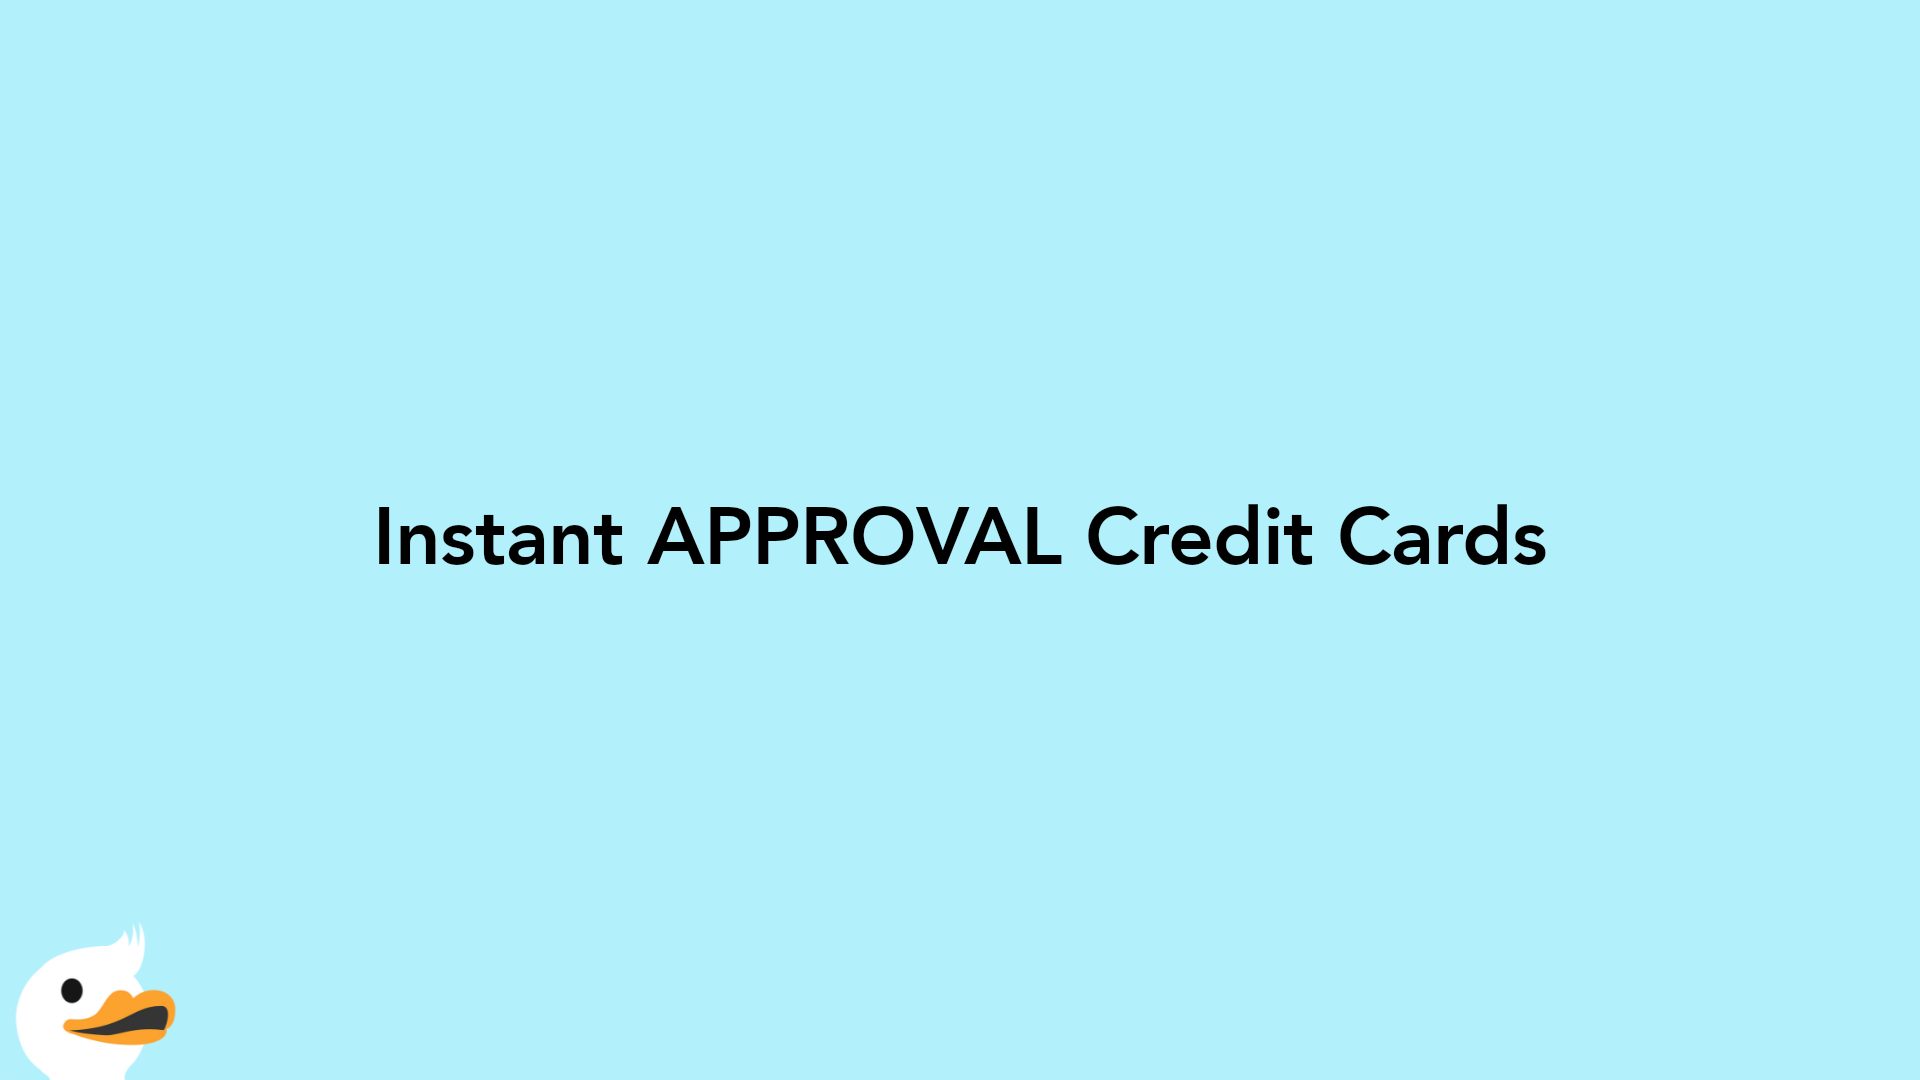 Instant APPROVAL Credit Cards